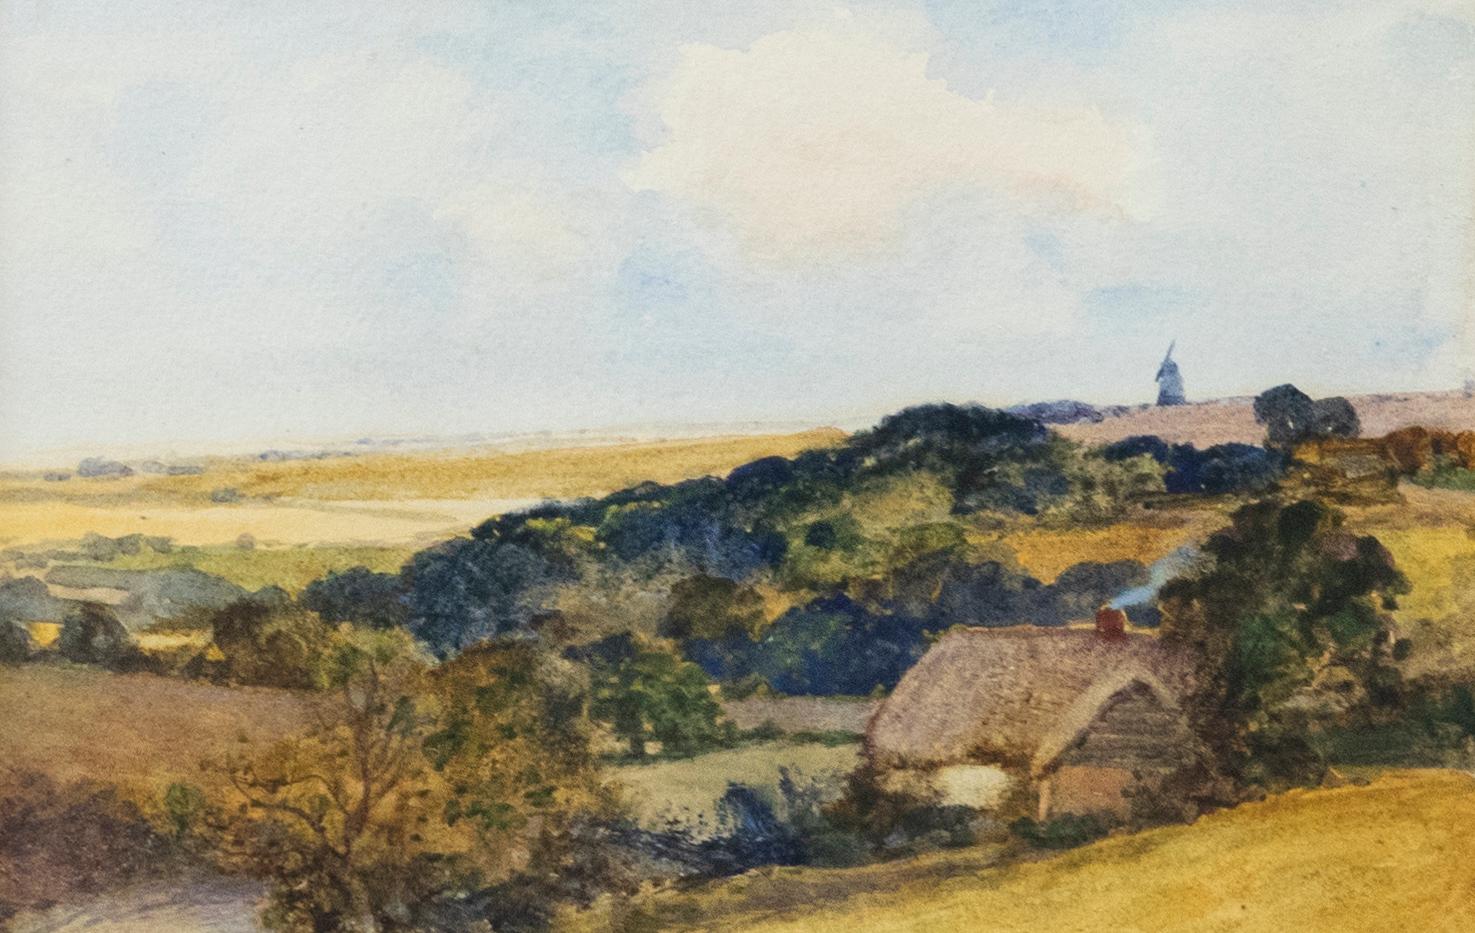 A delightful watercolour painting by Leopold Rivers (1852-1905), depicting a thatched cottage in the countryside with windmill on higher ground. The watercolour has been well-presented in an ornate gilt-effect frame with swept rails and foliate